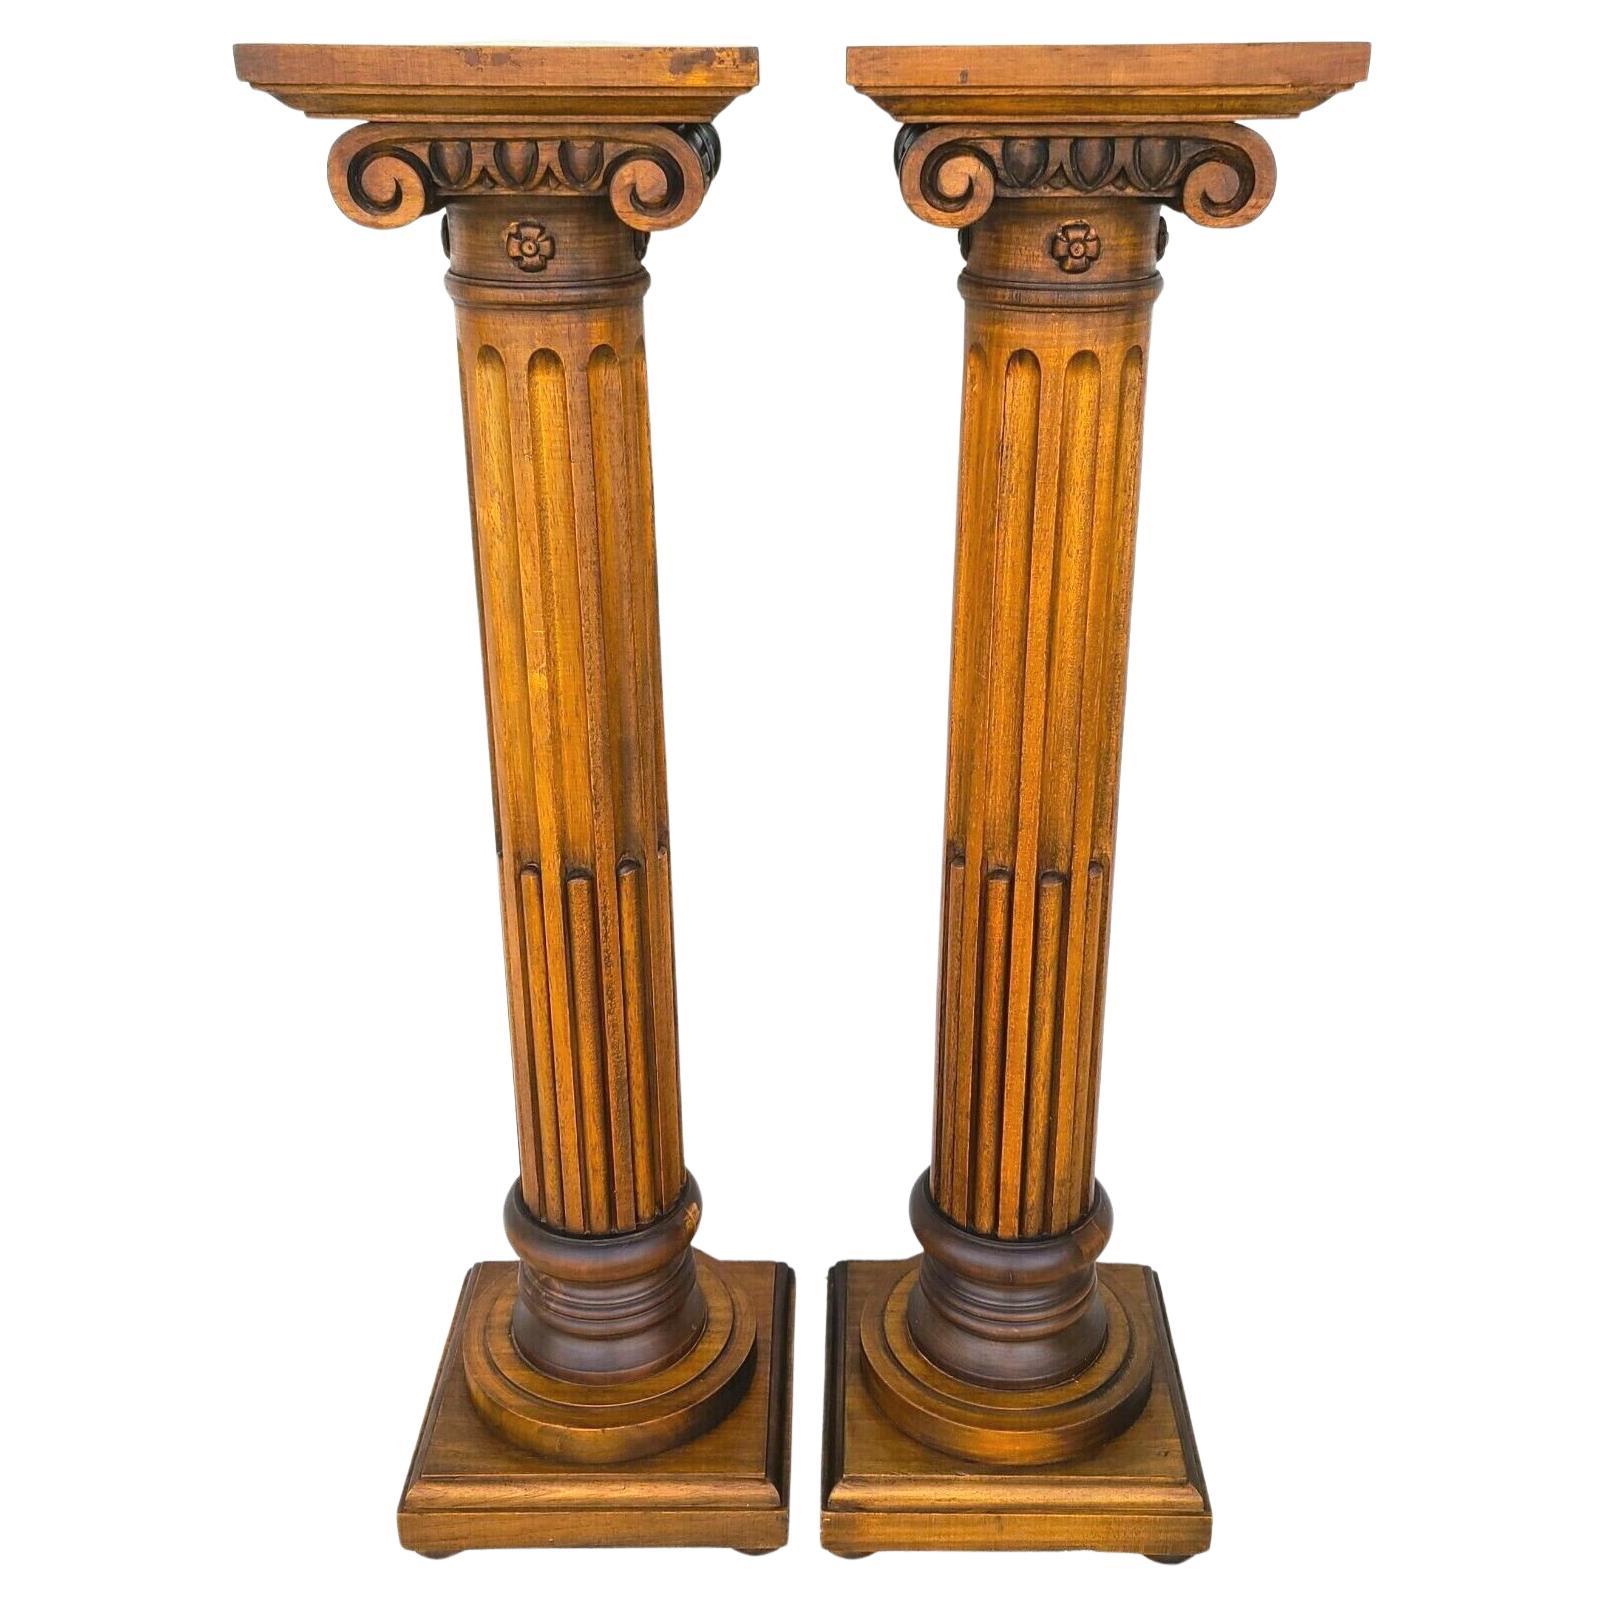 Walnut Pedestal Display Stands by Decorative Crafts Italy